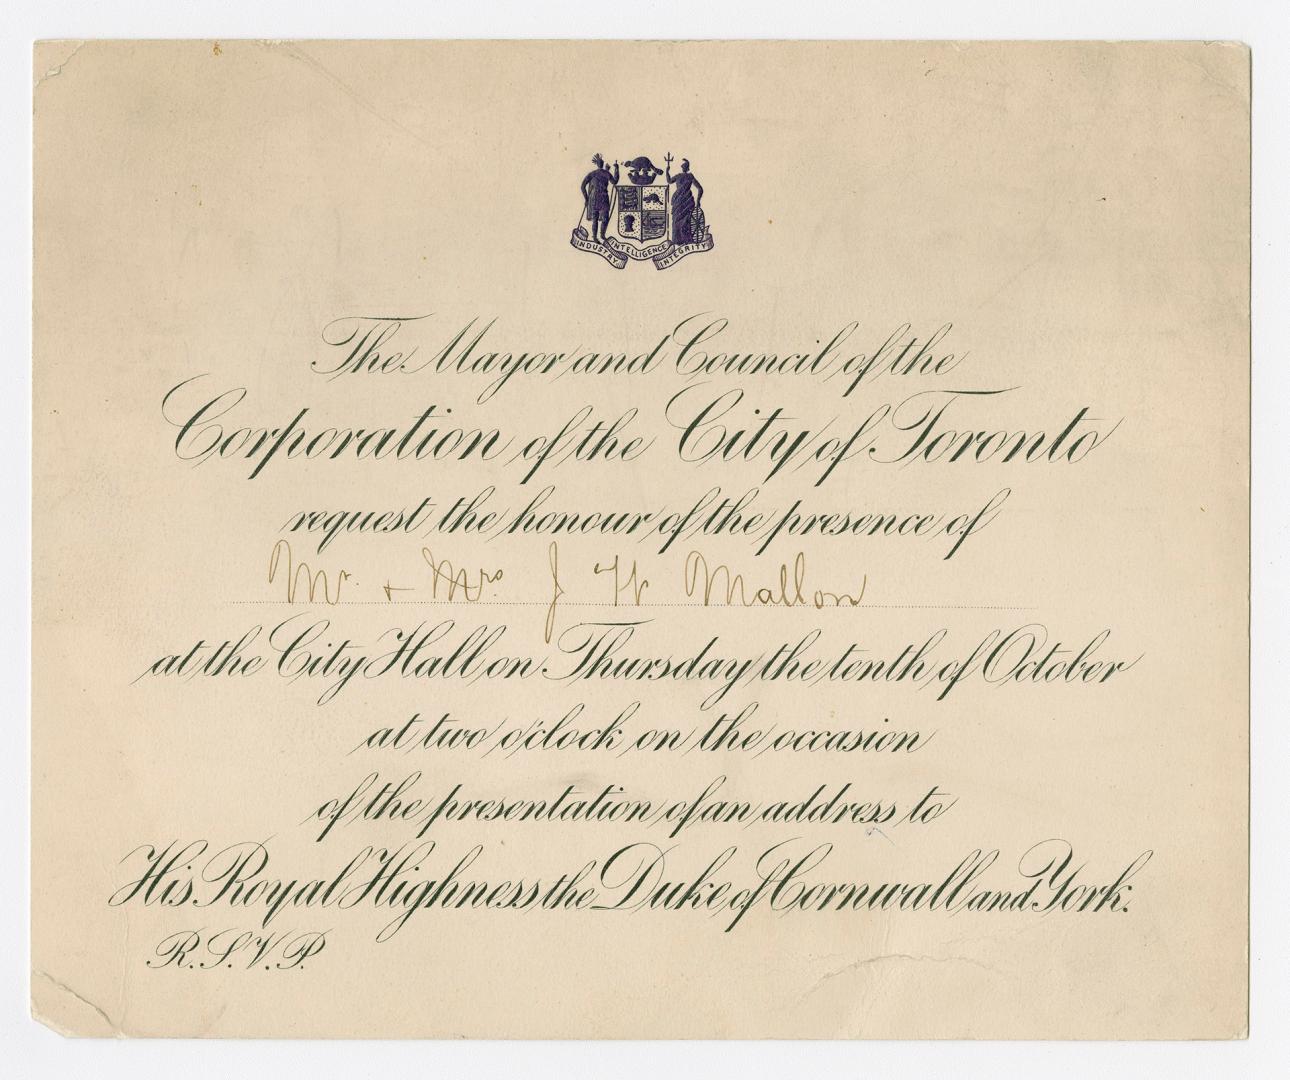 The Mayor and council of the corporation of the city of Toronto request the honour of the presence of [Mr. & Mrs. J.H. Mallon] at the city hall ... on the occasion of the presentation of an address to His Royal Highness the Duke of Cornwall and York